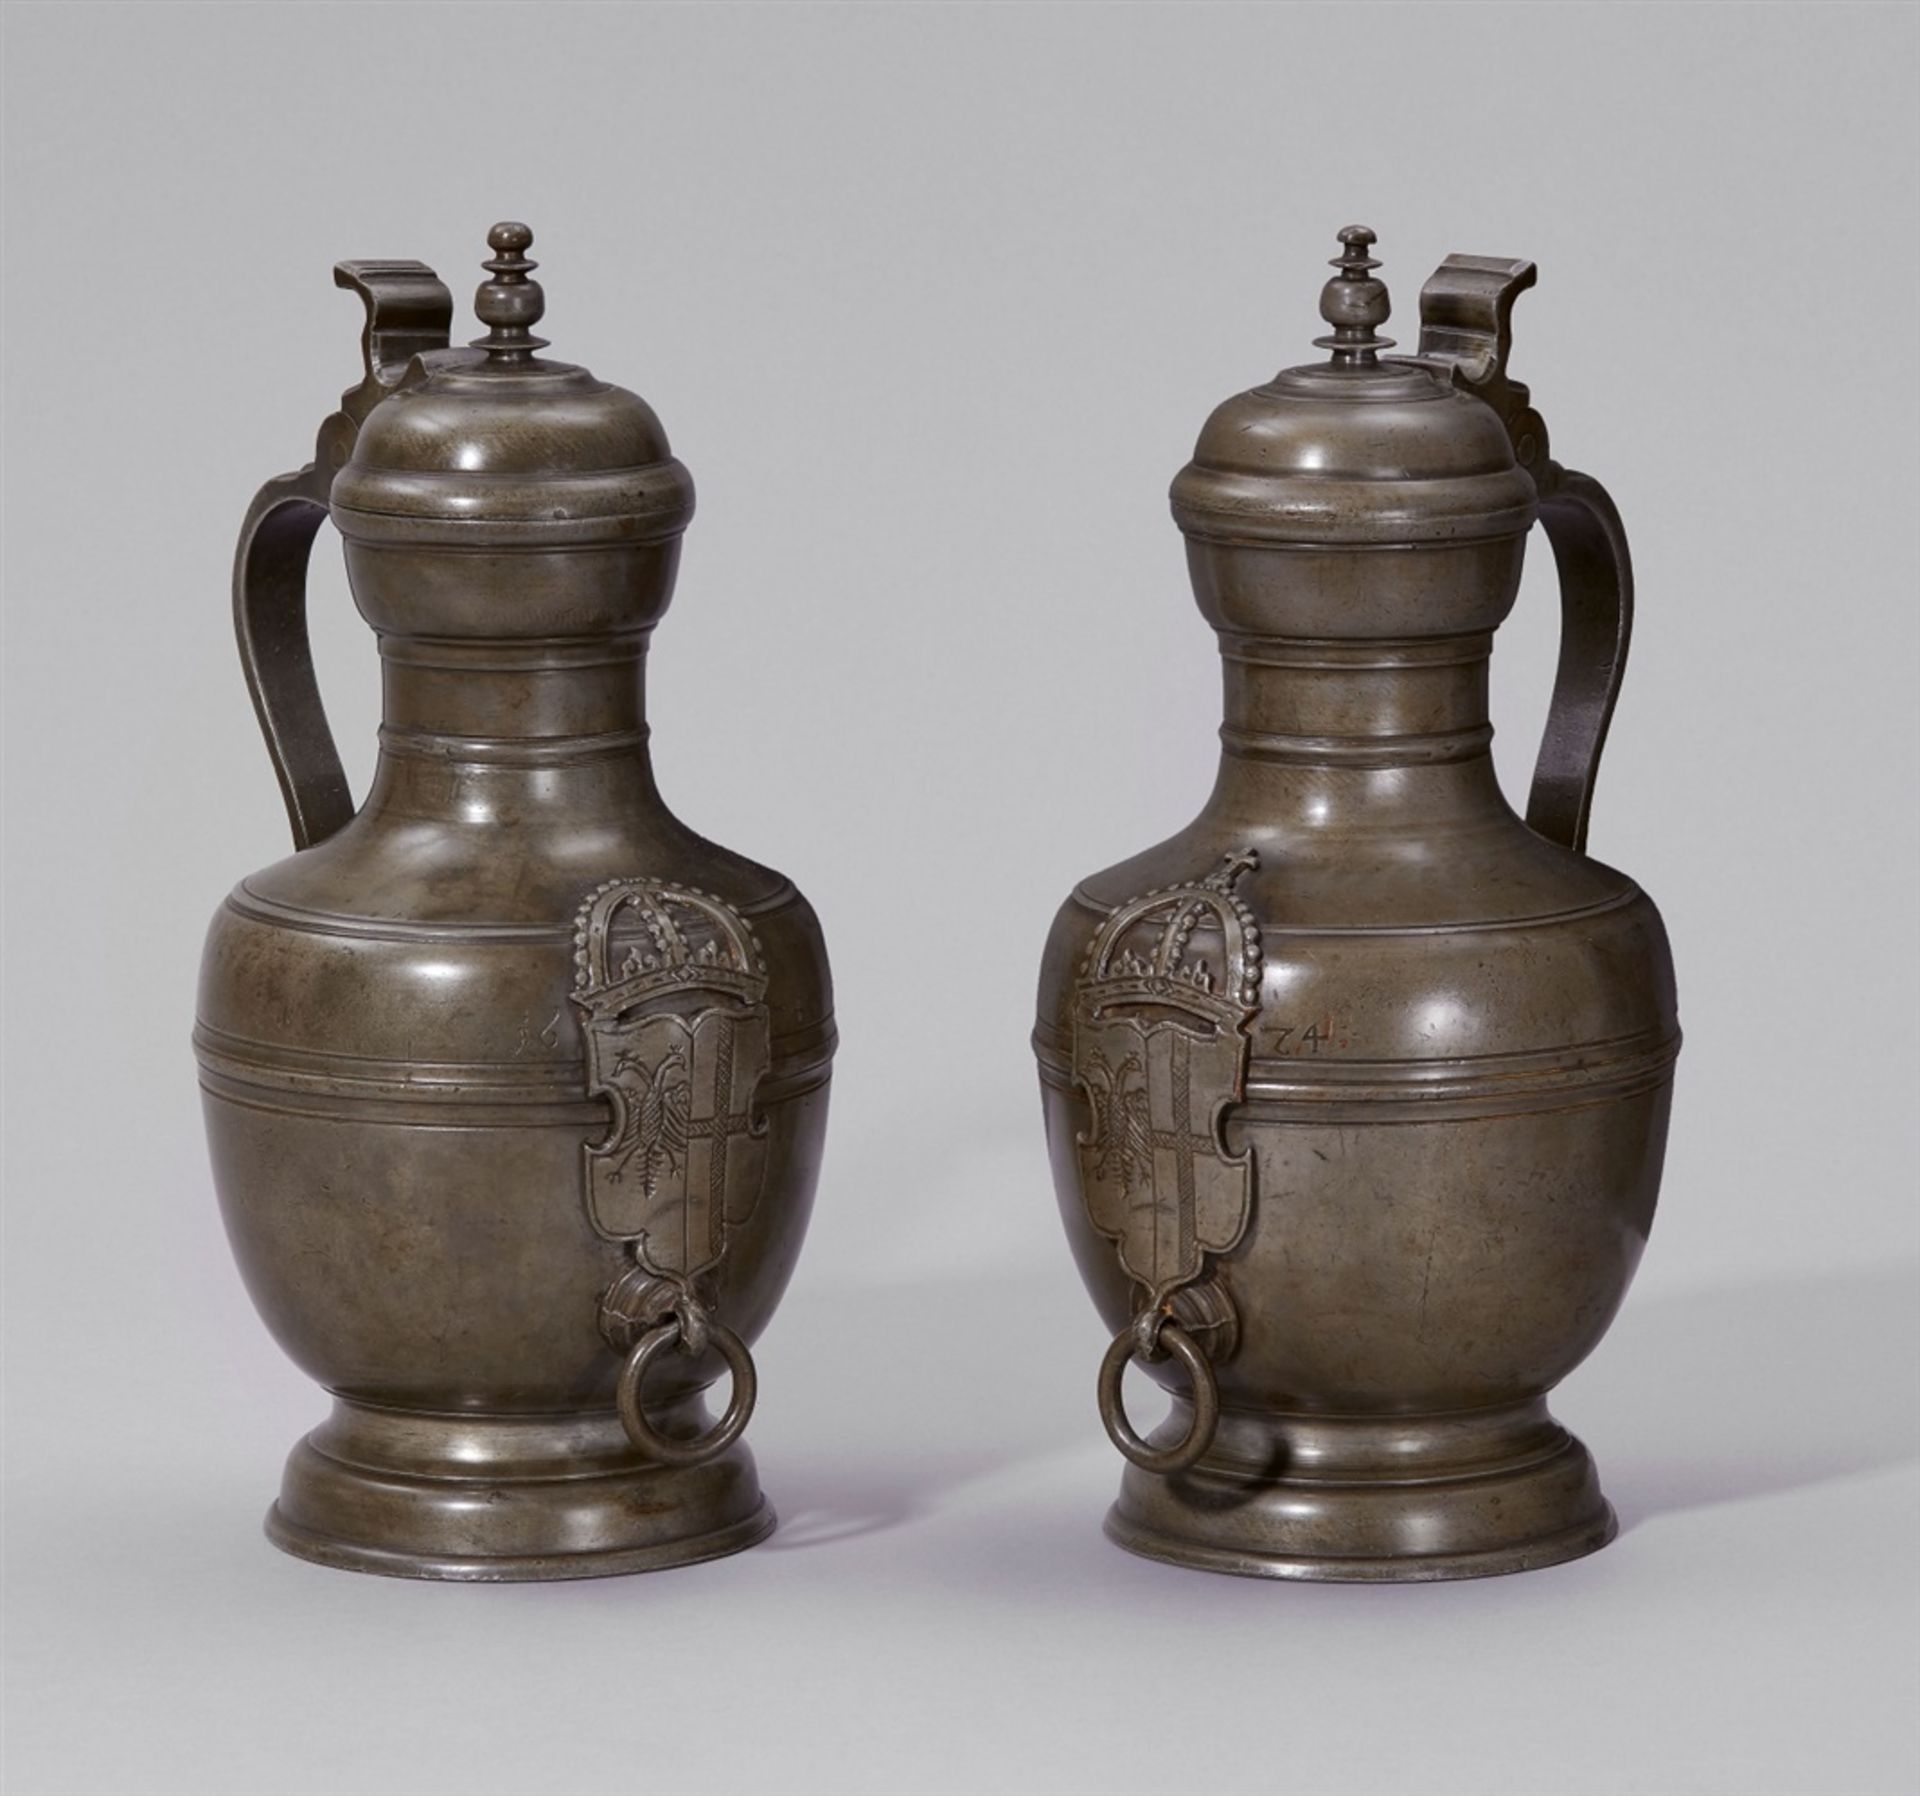 A pair of important jugs made for the council of NeussEngraved pewter pots of solid baluster-form